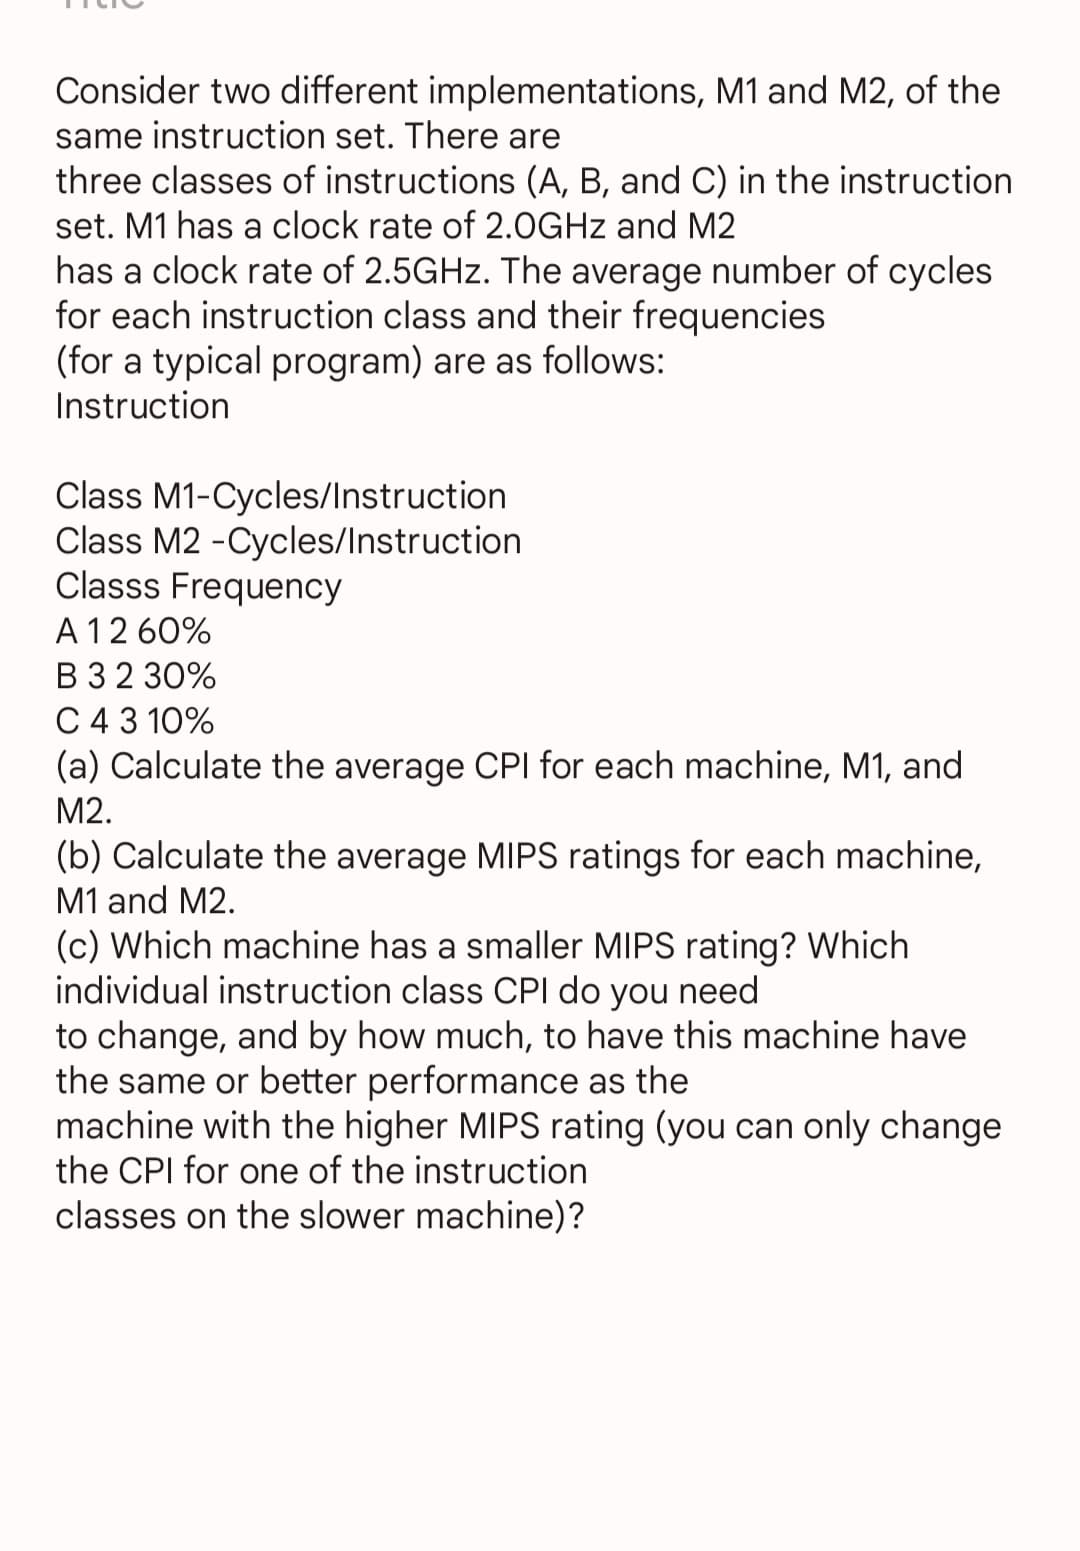 Consider two different implementations, M1 and M2, of the
same instruction set. There are
three classes of instructions (A, B, and C) in the instruction
set. M1 has a clock rate of 2.0GHz and M2
has a clock rate of 2.5GHz. The average number of cycles
for each instruction class and their frequencies
(for a typical program) are as follows:
Instruction
Class M1-Cycles/Instruction
Class M2-Cycles/Instruction
Classs Frequency
A 12 60%
B 3 2 30%
C 4 3 10%
(a) Calculate the average CPI for each machine, M1, and
M2.
(b) Calculate the average MIPS ratings for each machine,
M1 and M2.
(c) Which machine has a smaller MIPS rating? Which
individual instruction class CPI do you need
to change, and by how much, to have this machine have
the same or better performance as the
machine with the higher MIPS rating (you can only change
the CPI for one of the instruction
classes on the slower machine)?